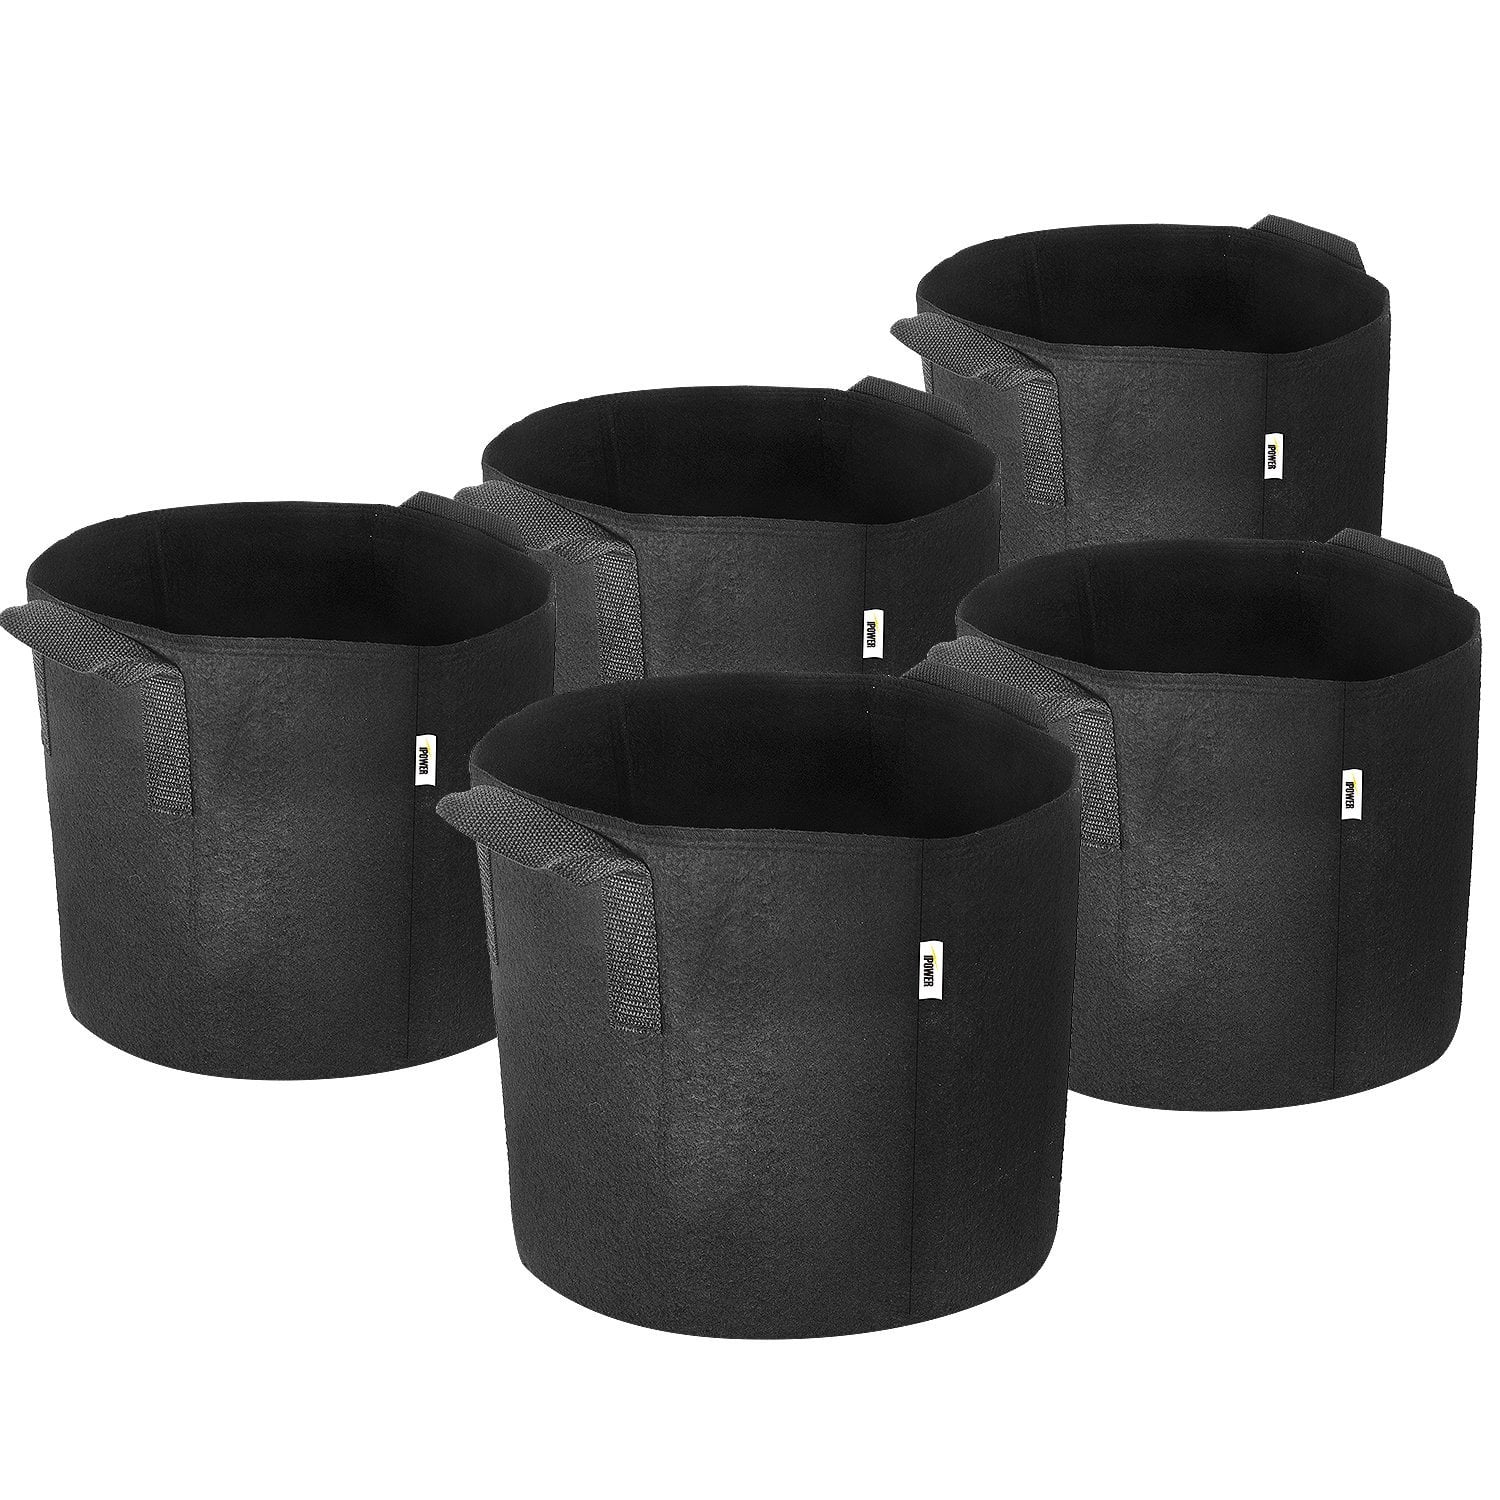 Details about   10-Pack Round Fabric Aeration Plant Pots Grow Bags 1  3 5 7 10 Gallon Black 